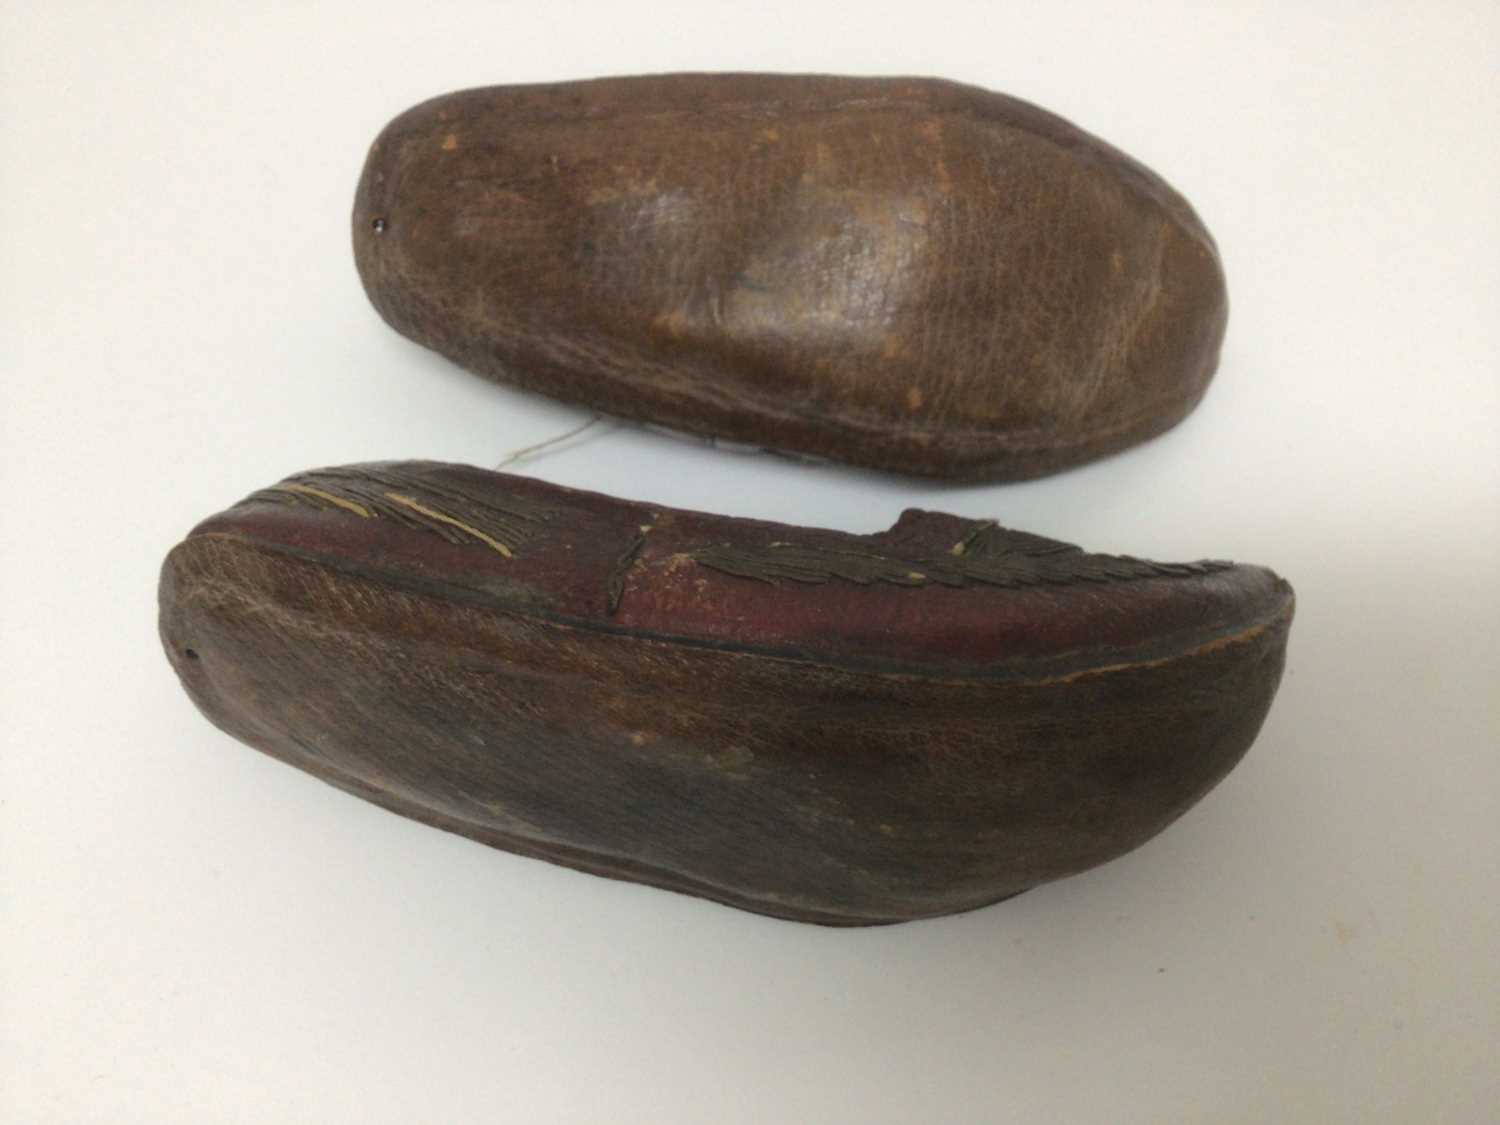 Pair of 18th or early 19th century Ottoman rede leather children's slippers / shoes with metal threa - Image 2 of 2